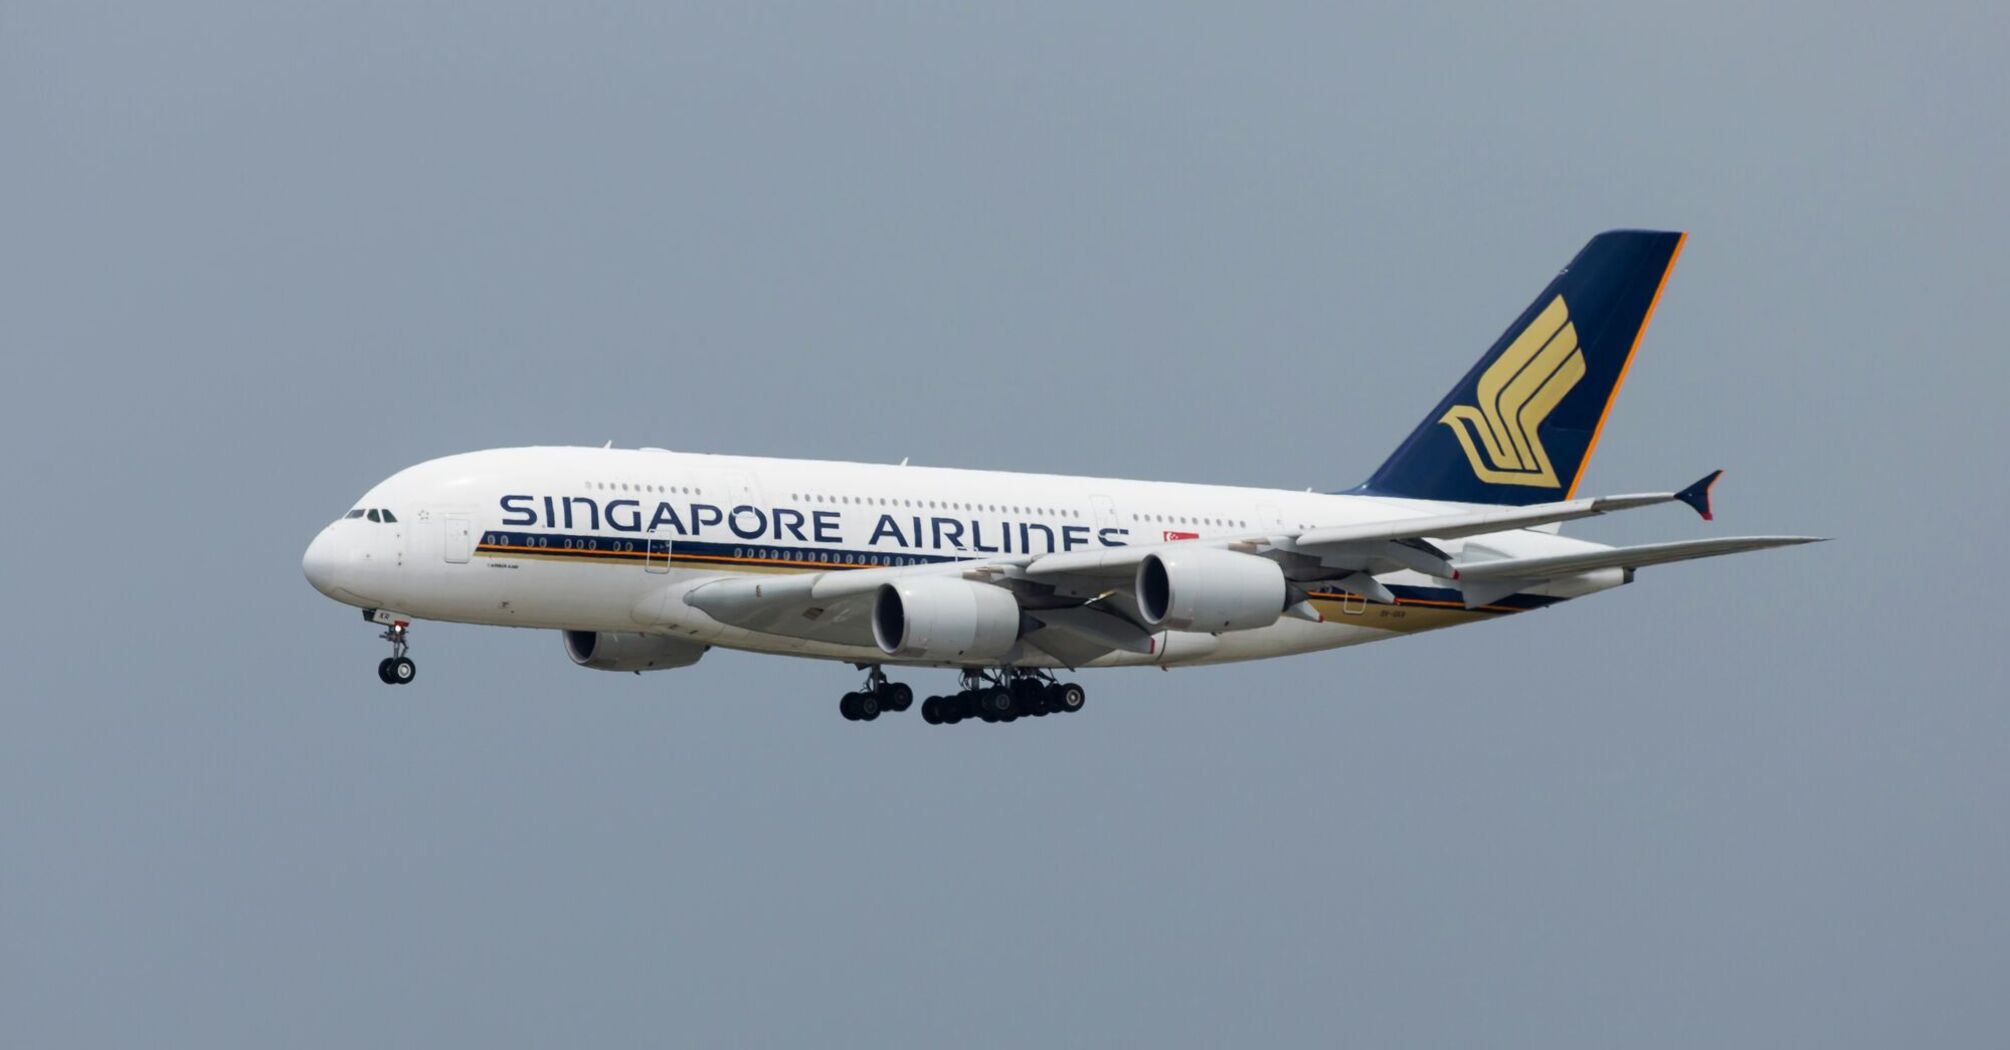 Singapore airliner in the sky